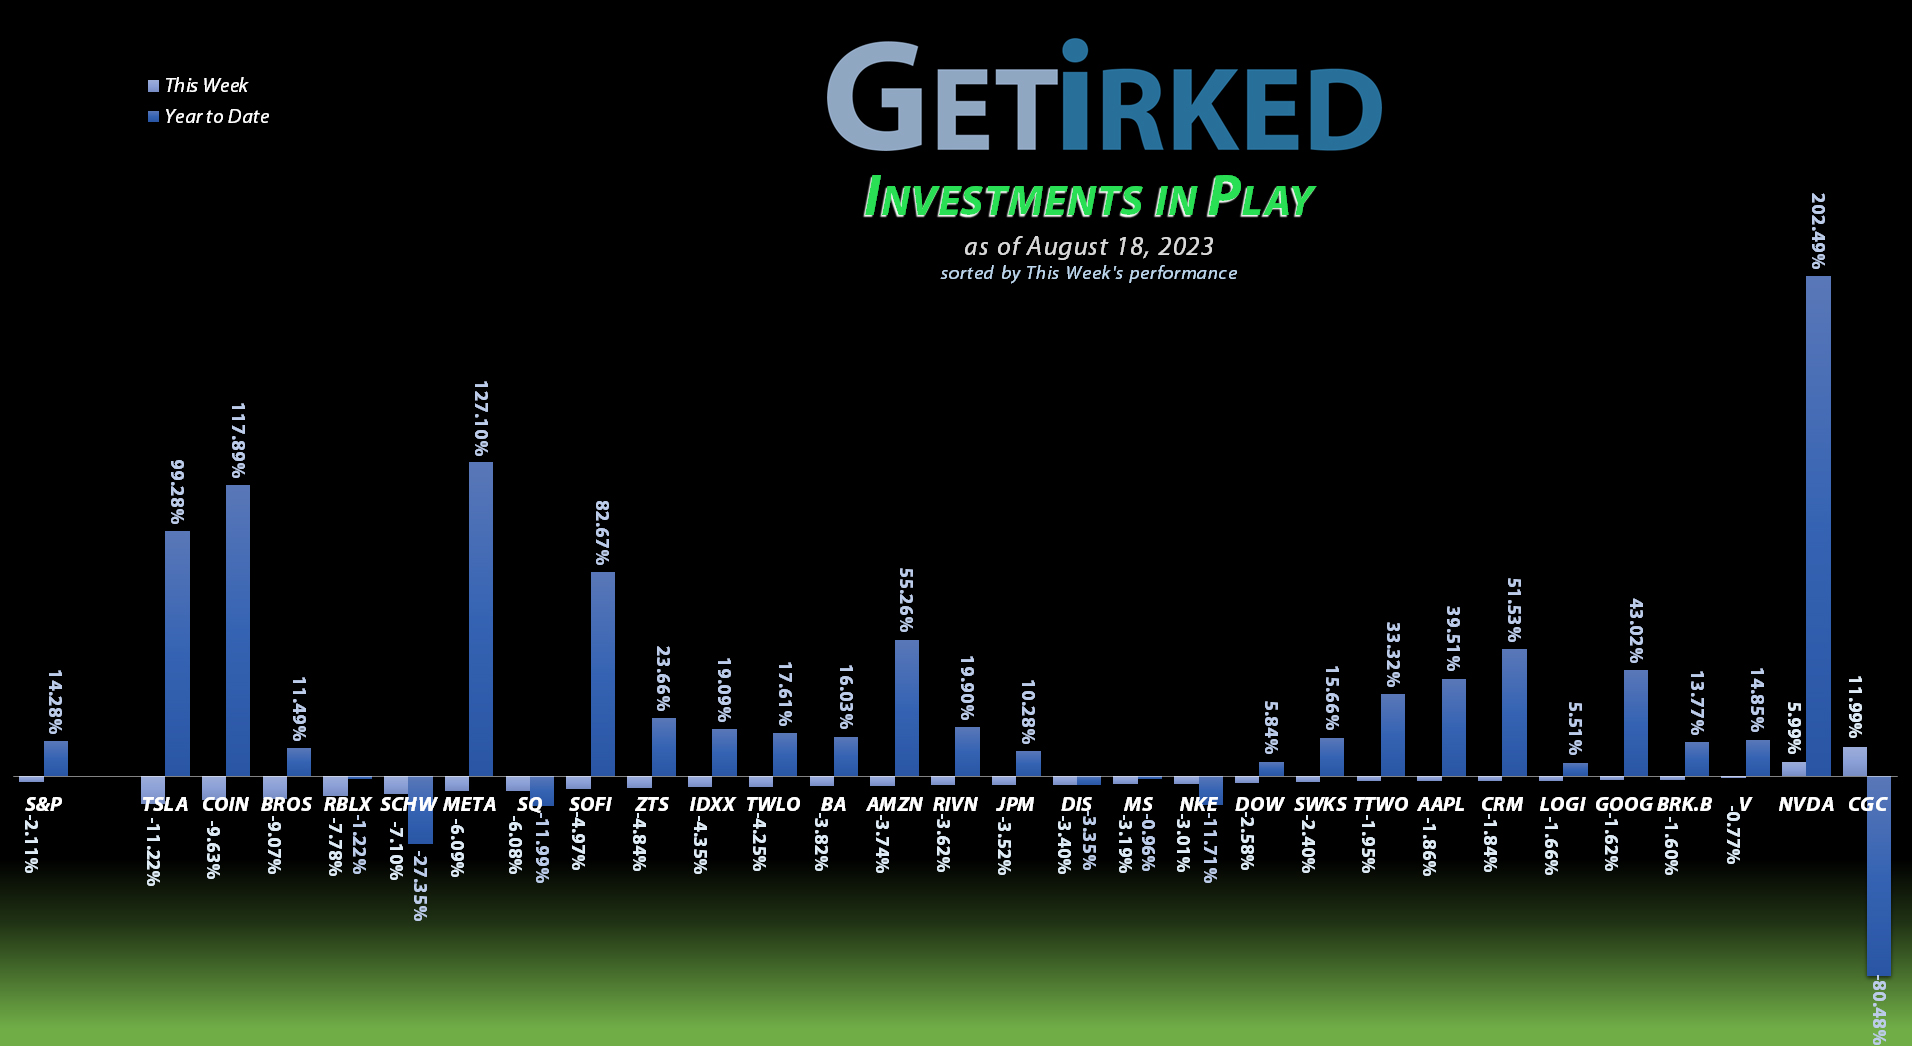 Get Irked's Investments in Play - August 18, 2023